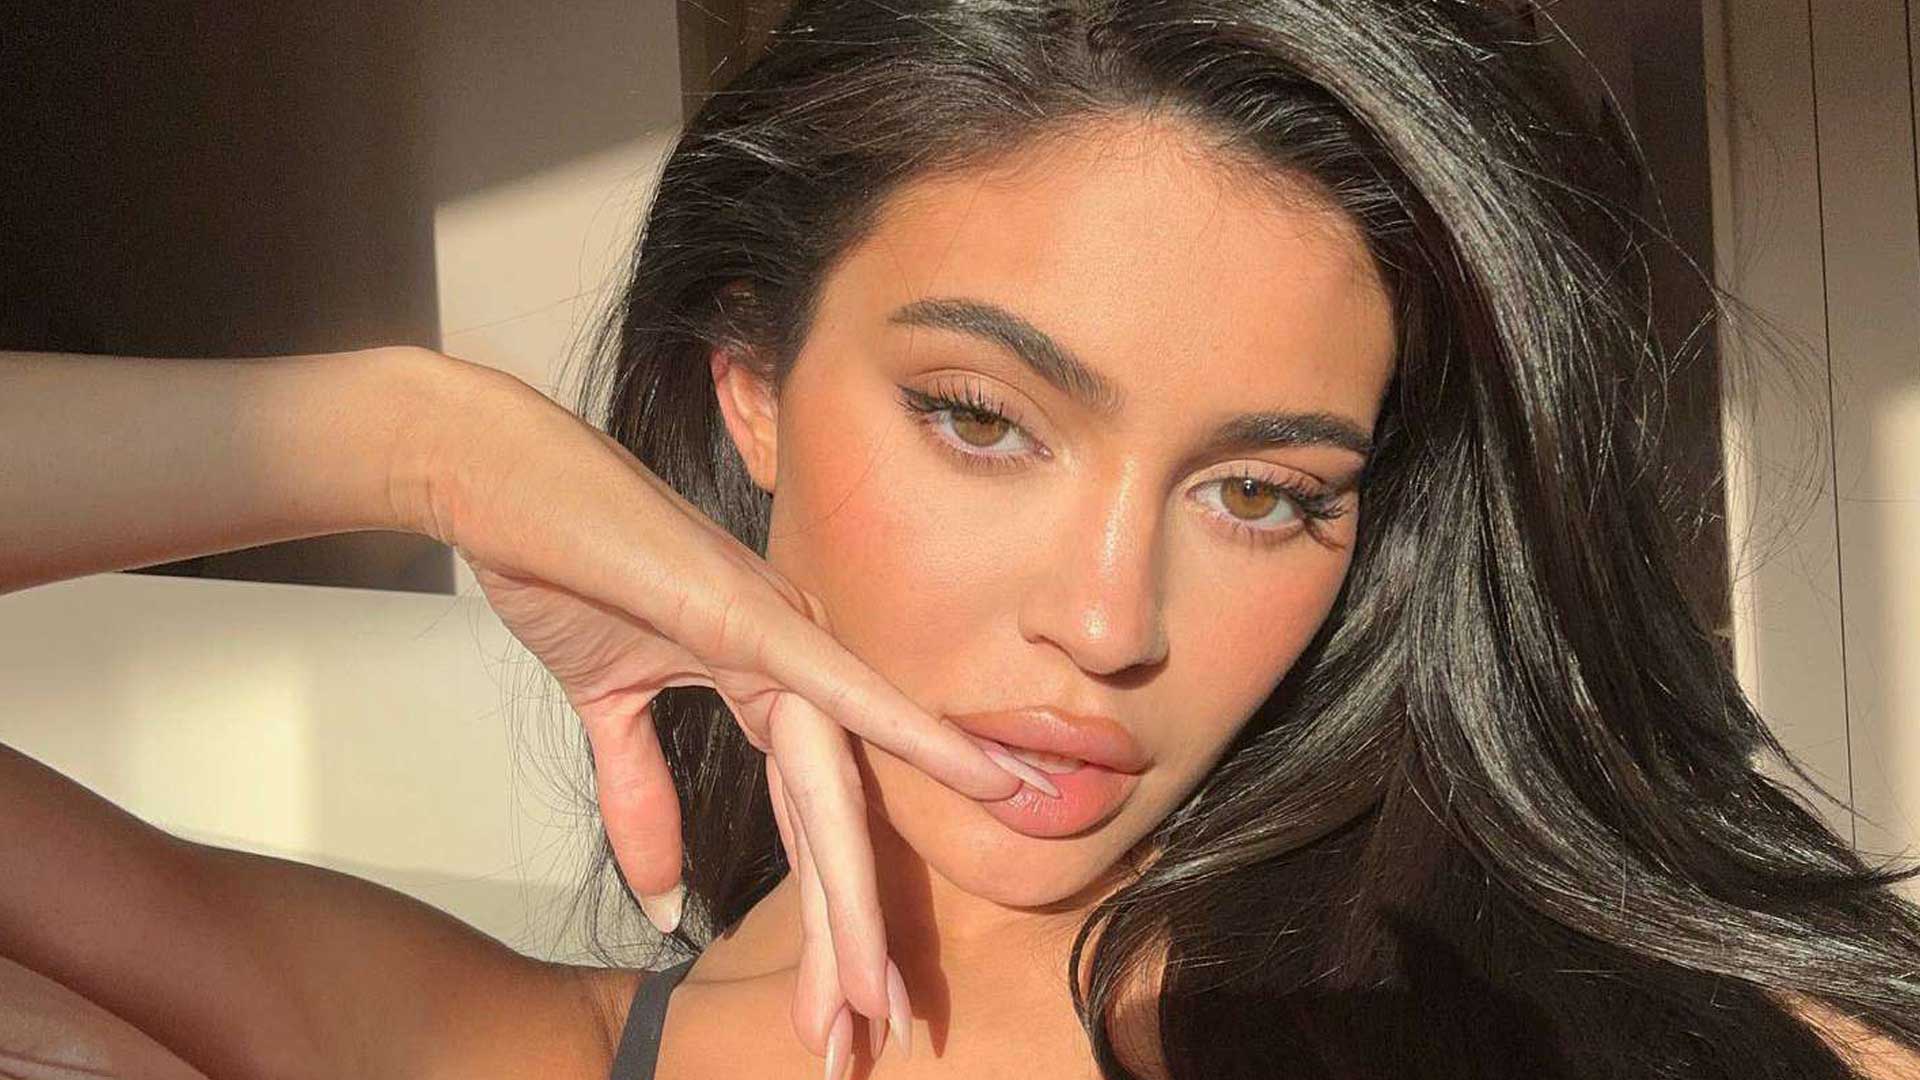  Has Kylie Jenner Had Cosmetic Surgery?